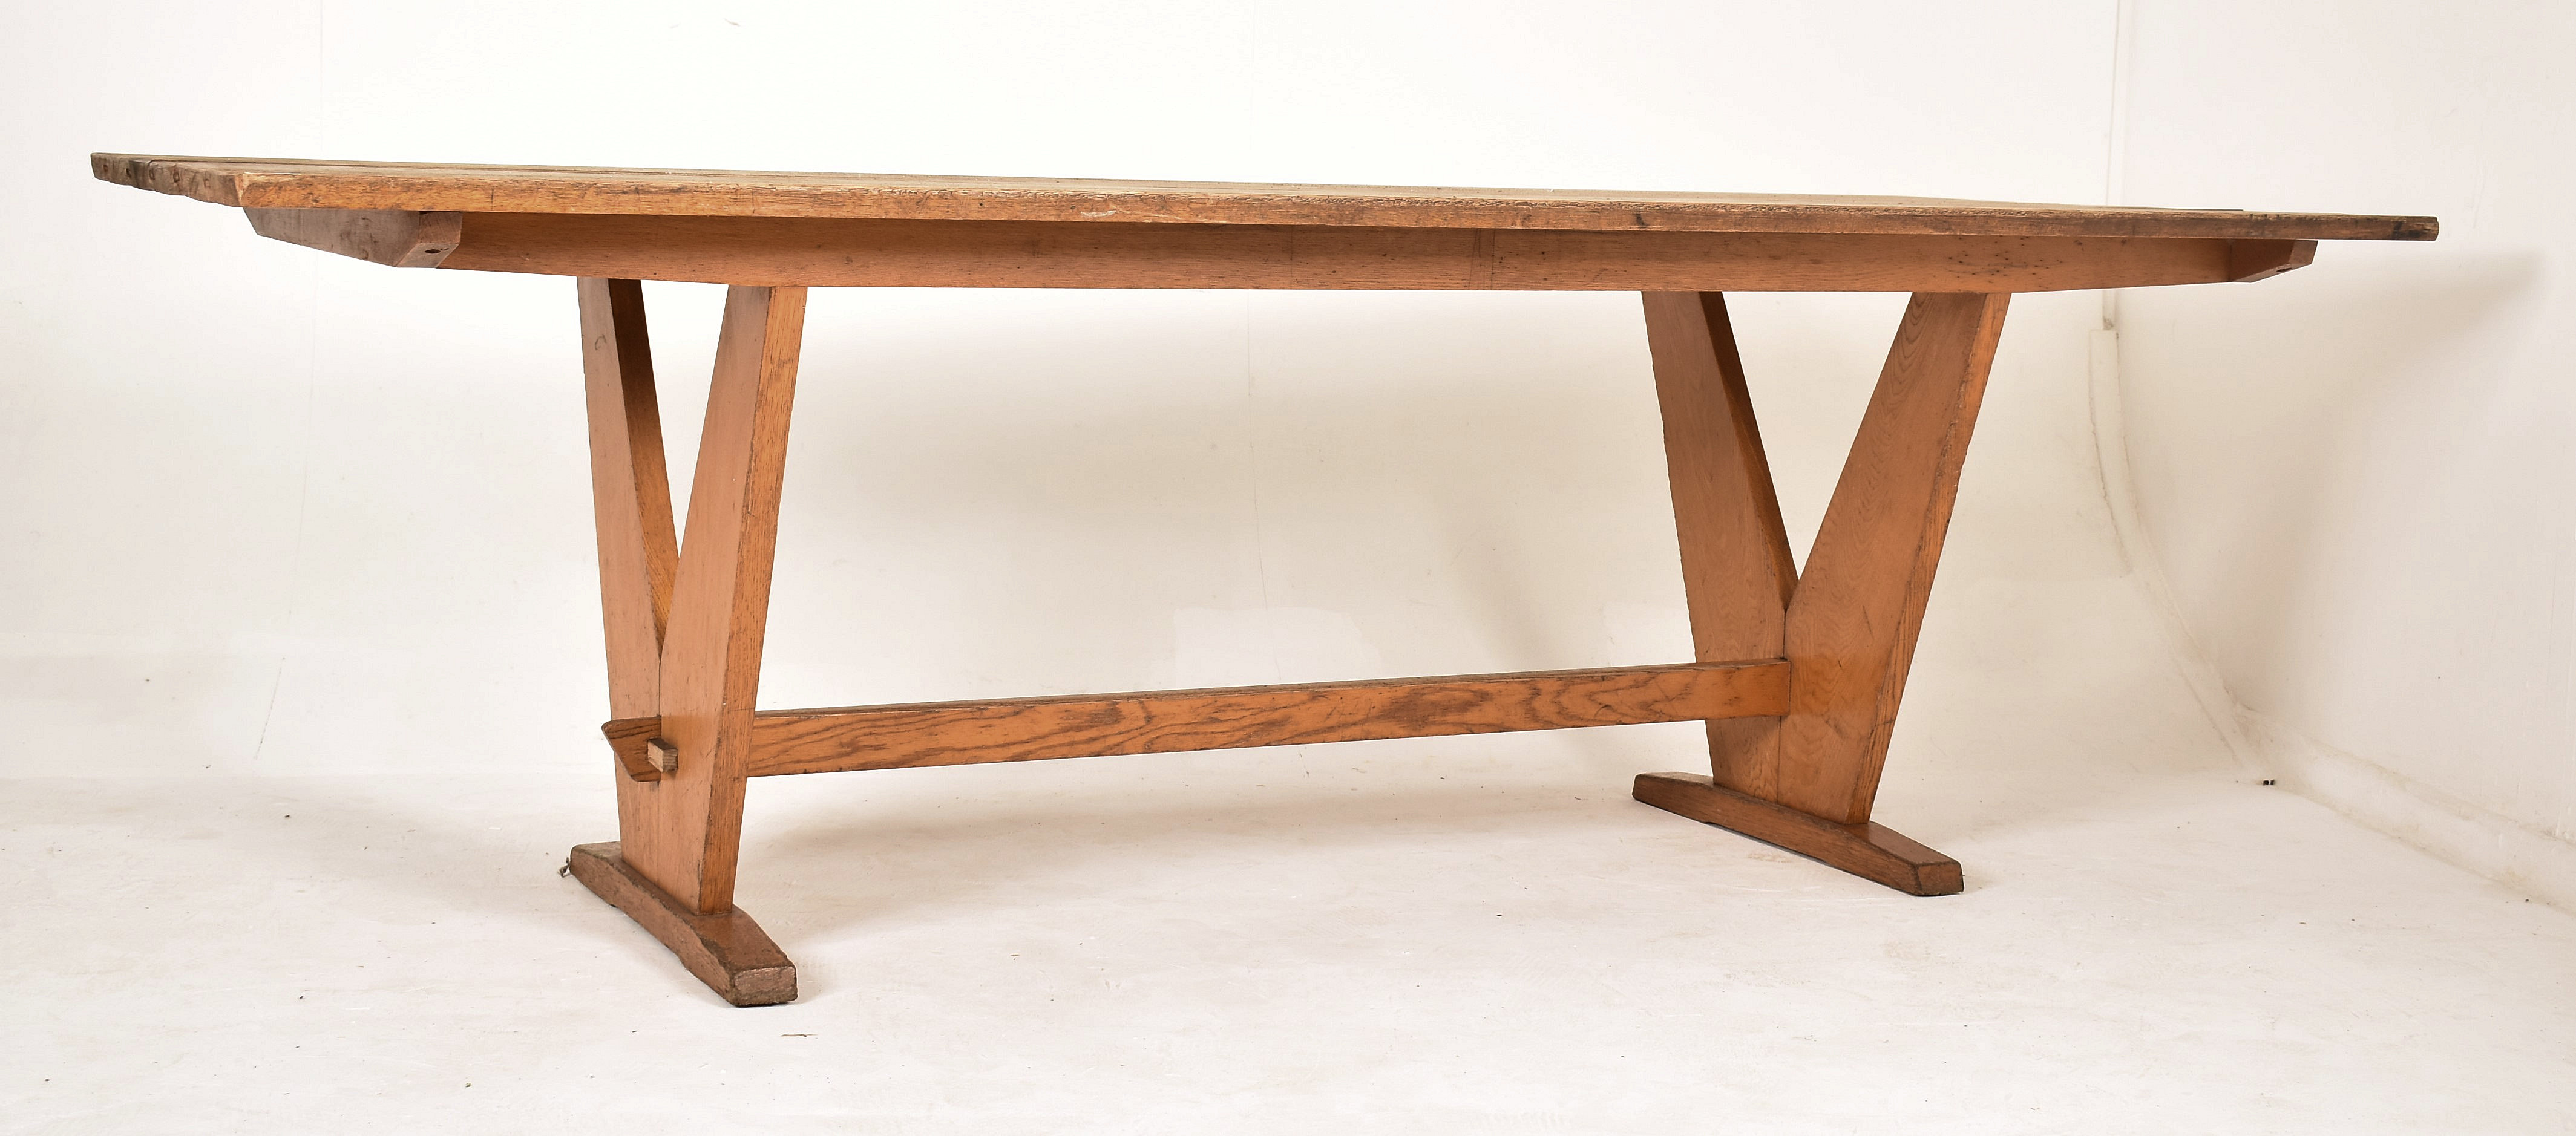 LARGE 20TH CENTURY ELM AND OAK REFECTORY DINING TABLE - Image 5 of 5